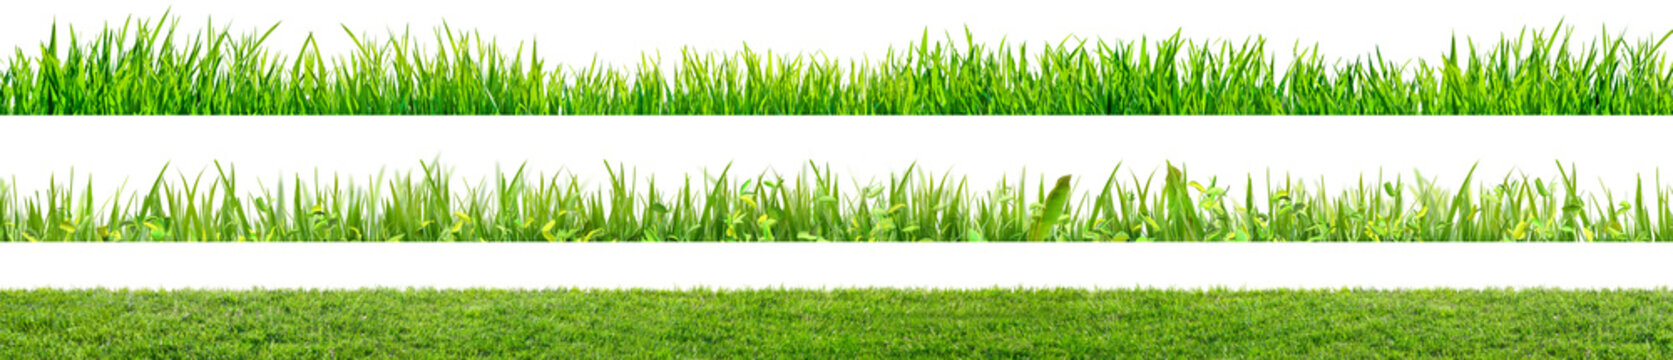 a set of green grass field isolated on white background